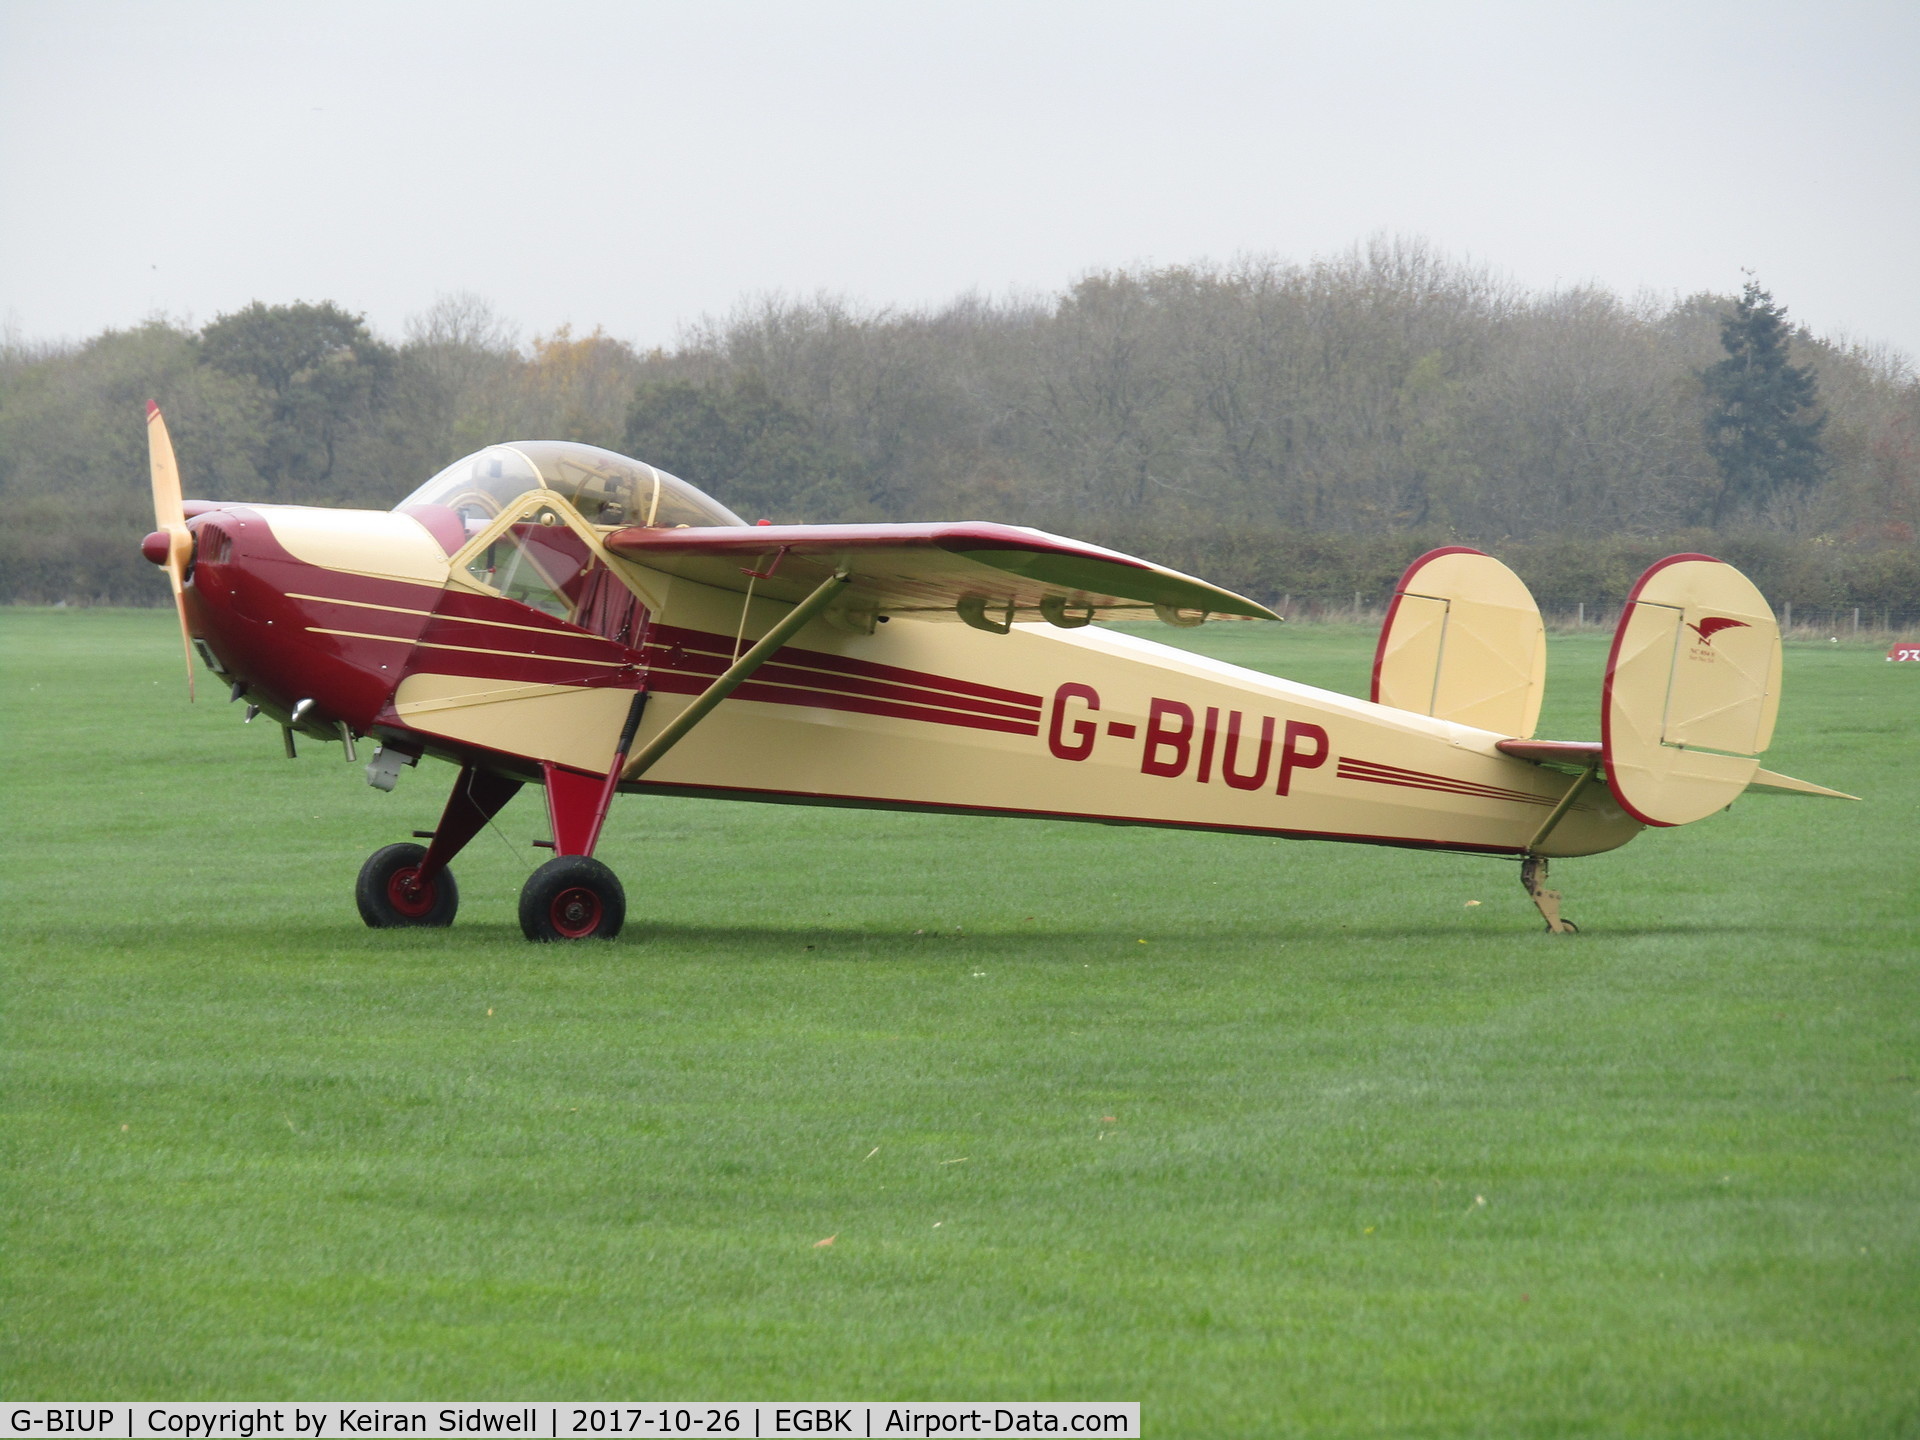 G-BIUP, 1950 Nord NC-854S C/N 54, A 67 year old beauty popped into Sywell, was definitely a welcome surprise!